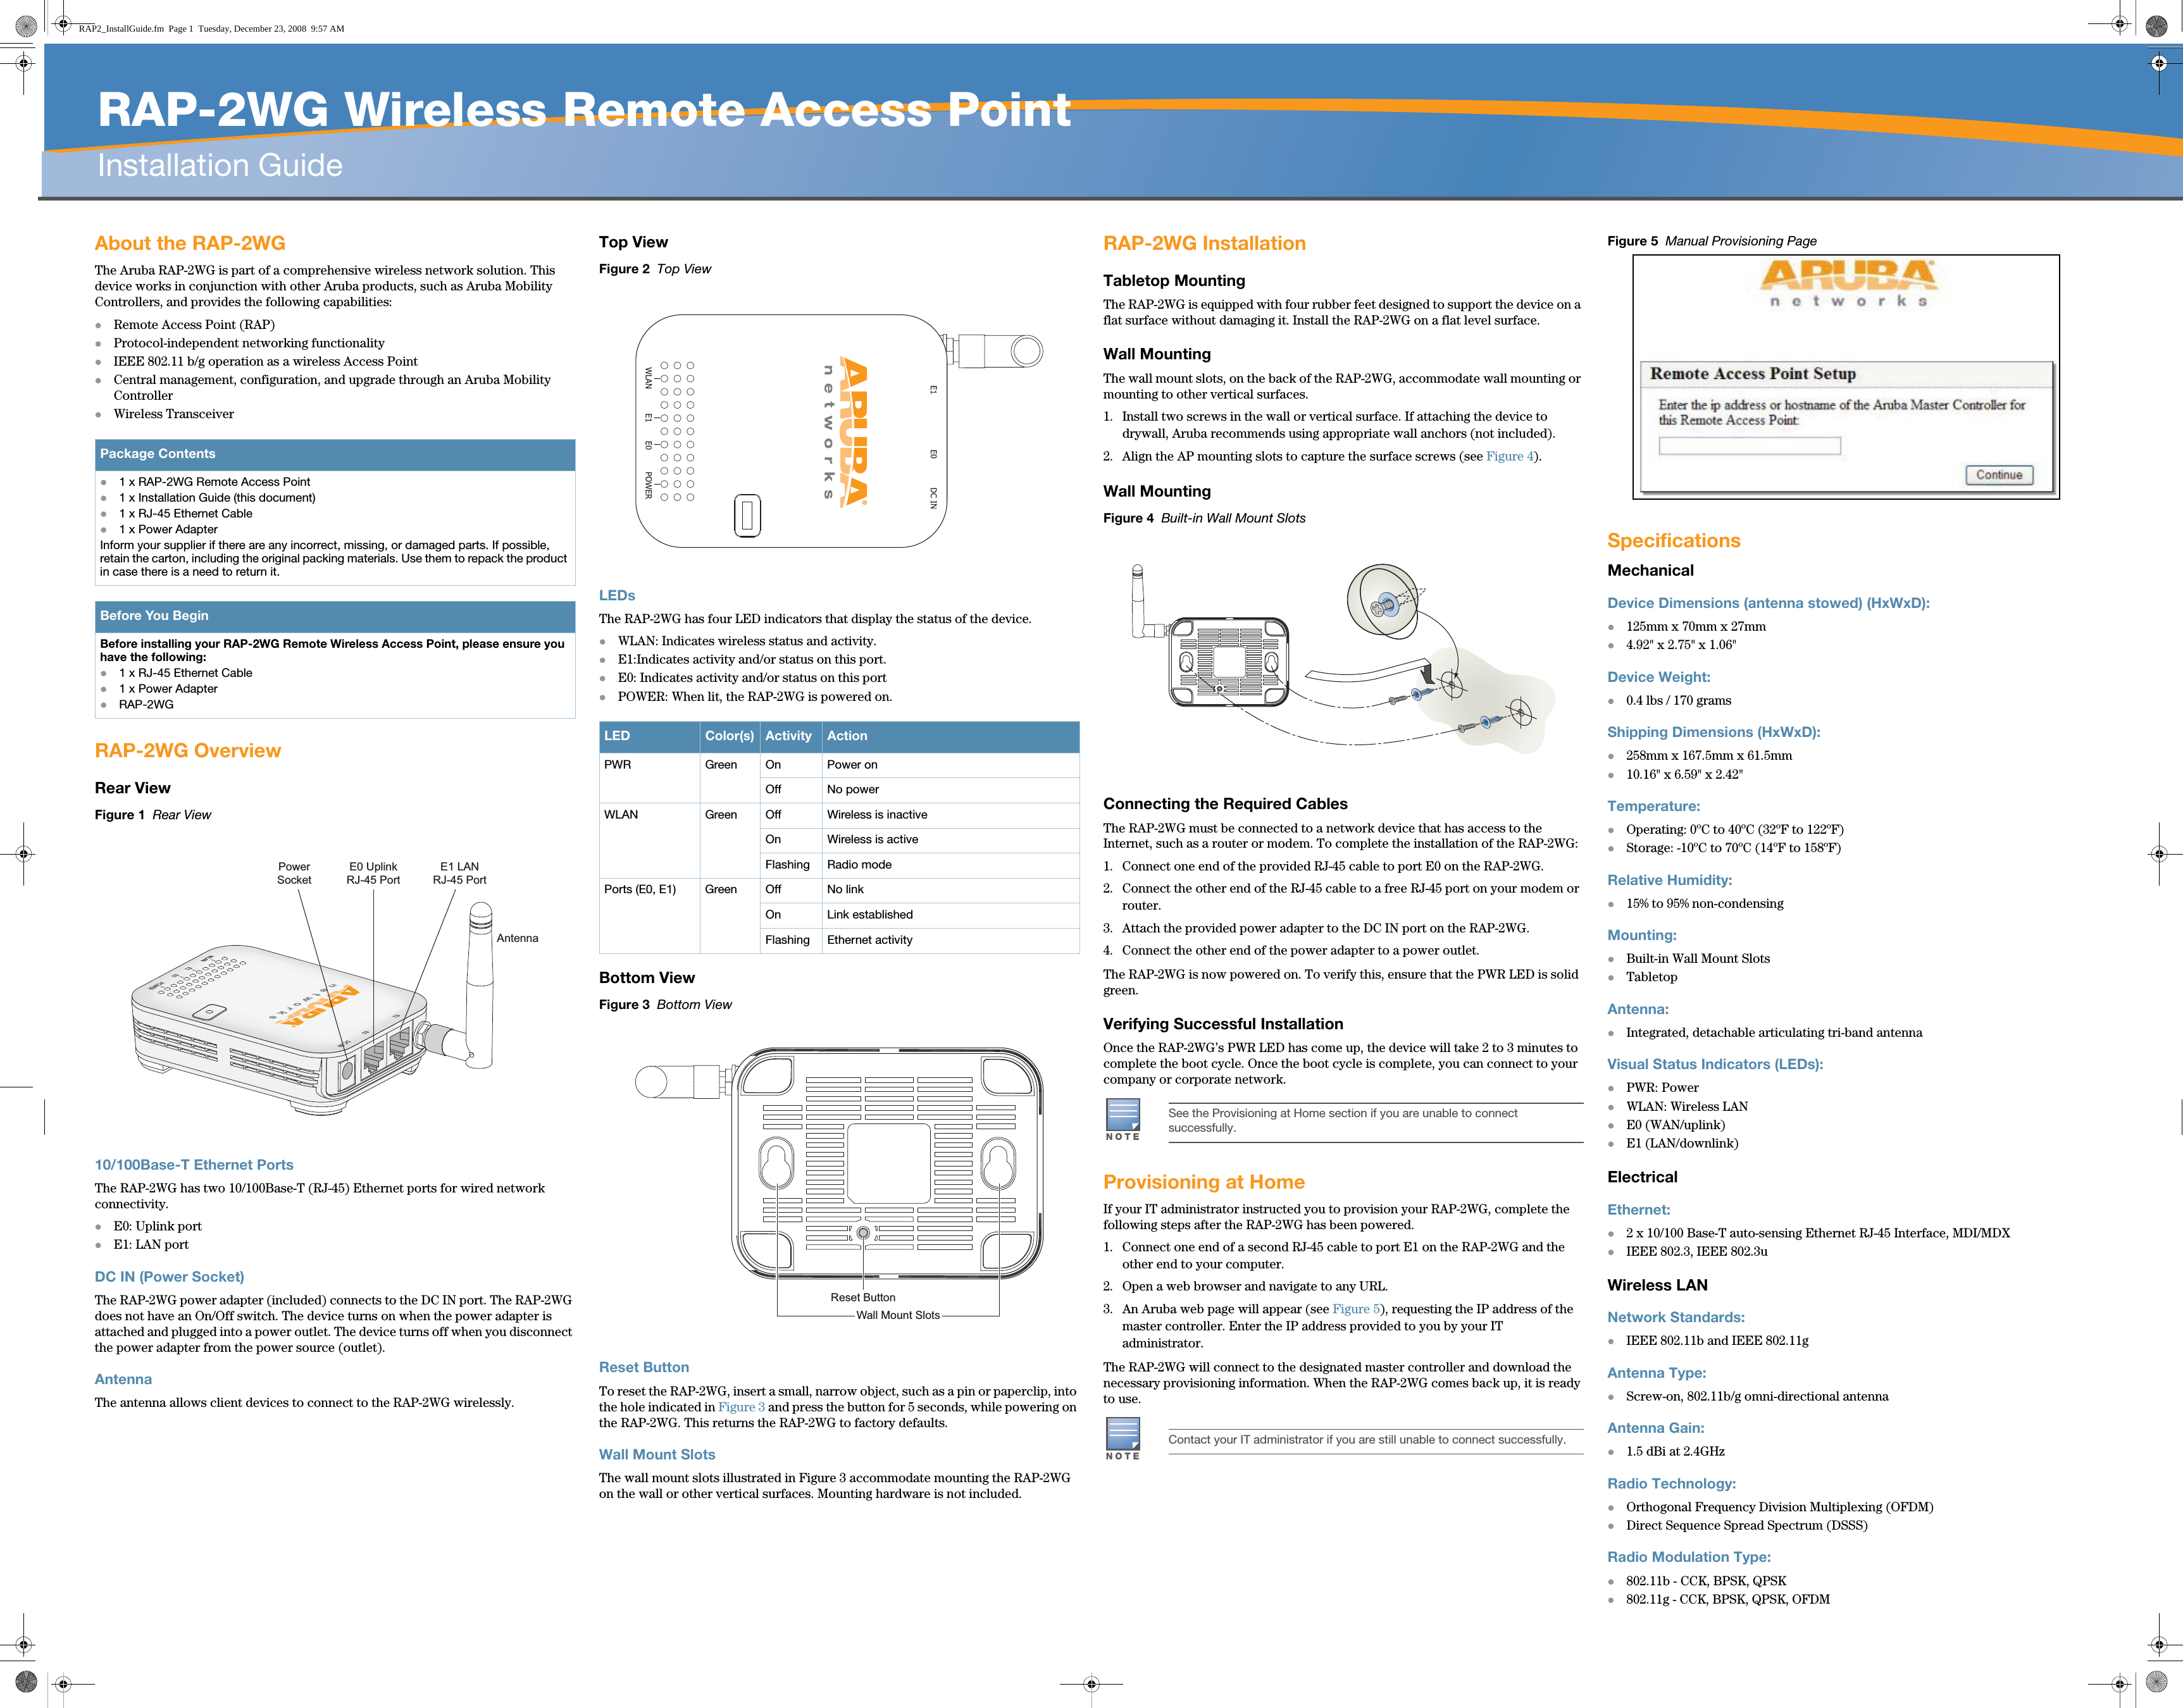   RAP-2WG Wireless Remote Access PointInstallation Guide About the RAP-2WGThe Aruba RAP-2WG is part of a comprehensive wireless network solution. This device works in conjunction with other Aruba products, such as Aruba Mobility Controllers, and provides the following capabilities:zRemote Access Point (RAP)zProtocol-independent networking functionalityzIEEE 802.11 b/g operation as a wireless Access PointzCentral management, configuration, and upgrade through an Aruba Mobility ControllerzWireless TransceiverRAP-2WG OverviewRear ViewFigure 1  Rear View10/100Base-T Ethernet PortsThe RAP-2WG has two 10/100Base-T (RJ-45) Ethernet ports for wired network connectivity. zE0: Uplink portzE1: LAN portDC IN (Power Socket)The RAP-2WG power adapter (included) connects to the DC IN port. The RAP-2WG does not have an On/Off switch. The device turns on when the power adapter is attached and plugged into a power outlet. The device turns off when you disconnect the power adapter from the power source (outlet).AntennaThe antenna allows client devices to connect to the RAP-2WG wirelessly. Top ViewFigure 2  Top ViewLEDsThe RAP-2WG has four LED indicators that display the status of the device. zWLAN: Indicates wireless status and activity.zE1:Indicates activity and/or status on this port.zE0: Indicates activity and/or status on this portzPOWER: When lit, the RAP-2WG is powered on. Bottom ViewFigure 3  Bottom ViewReset ButtonTo reset the RAP-2WG, insert a small, narrow object, such as a pin or paperclip, into the hole indicated in Figure 3 and press the button for 5 seconds, while powering on the RAP-2WG. This returns the RAP-2WG to factory defaults.Wall Mount SlotsThe wall mount slots illustrated in Figure 3 accommodate mounting the RAP-2WG on the wall or other vertical surfaces. Mounting hardware is not included.RAP-2WG InstallationTabletop MountingThe RAP-2WG is equipped with four rubber feet designed to support the device on a flat surface without damaging it. Install the RAP-2WG on a flat level surface.Wall MountingThe wall mount slots, on the back of the RAP-2WG, accommodate wall mounting or mounting to other vertical surfaces.1. Install two screws in the wall or vertical surface. If attaching the device to drywall, Aruba recommends using appropriate wall anchors (not included).2. Align the AP mounting slots to capture the surface screws (see Figure 4).Wall MountingFigure 4  Built-in Wall Mount SlotsConnecting the Required CablesThe RAP-2WG must be connected to a network device that has access to the Internet, such as a router or modem. To complete the installation of the RAP-2WG:1. Connect one end of the provided RJ-45 cable to port E0 on the RAP-2WG.2. Connect the other end of the RJ-45 cable to a free RJ-45 port on your modem or router. 3. Attach the provided power adapter to the DC IN port on the RAP-2WG.4. Connect the other end of the power adapter to a power outlet.The RAP-2WG is now powered on. To verify this, ensure that the PWR LED is solid green. Verifying Successful InstallationOnce the RAP-2WG’s PWR LED has come up, the device will take 2 to 3 minutes to complete the boot cycle. Once the boot cycle is complete, you can connect to your company or corporate network.Provisioning at HomeIf your IT administrator instructed you to provision your RAP-2WG, complete the following steps after the RAP-2WG has been powered.1. Connect one end of a second RJ-45 cable to port E1 on the RAP-2WG and the other end to your computer.2. Open a web browser and navigate to any URL.3. An Aruba web page will appear (see Figure 5), requesting the IP address of the master controller. Enter the IP address provided to you by your IT administrator.The RAP-2WG will connect to the designated master controller and download the necessary provisioning information. When the RAP-2WG comes back up, it is ready to use. Figure 5  Manual Provisioning PageSpecificationsMechanicalDevice Dimensions (antenna stowed) (HxWxD):z125mm x 70mm x 27mmz4.92&quot; x 2.75&quot; x 1.06&quot;Device Weight: z0.4 lbs / 170 gramsShipping Dimensions (HxWxD):z258mm x 167.5mm x 61.5mmz10.16&quot; x 6.59&quot; x 2.42&quot;Temperature:zOperating: 0ºC to 40ºC (32ºF to 122ºF)zStorage: -10ºC to 70ºC (14ºF to 158ºF)Relative Humidity:z15% to 95% non-condensingMounting:zBuilt-in Wall Mount SlotszTabletop Antenna:zIntegrated, detachable articulating tri-band antennaVisual Status Indicators (LEDs):zPWR: PowerzWLAN: Wireless LANzE0 (WAN/uplink)zE1 (LAN/downlink)ElectricalEthernet:z2 x 10/100 Base-T auto-sensing Ethernet RJ-45 Interface, MDI/MDXzIEEE 802.3, IEEE 802.3uWireless LANNetwork Standards:zIEEE 802.11b and IEEE 802.11gAntenna Type:zScrew-on, 802.11b/g omni-directional antennaAntenna Gain:z1.5 dBi at 2.4GHzRadio Technology:zOrthogonal Frequency Division Multiplexing (OFDM)zDirect Sequence Spread Spectrum (DSSS)Radio Modulation Type:z802.11b - CCK, BPSK, QPSKz802.11g - CCK, BPSK, QPSK, OFDMPackage Contentsz1 x RAP-2WG Remote Access Point z1 x Installation Guide (this document)z1 x RJ-45 Ethernet Cablez1 x Power AdapterInform your supplier if there are any incorrect, missing, or damaged parts. If possible, retain the carton, including the original packing materials. Use them to repack the product in case there is a need to return it.Before You BeginBefore installing your RAP-2WG Remote Wireless Access Point, please ensure you have the following:z1 x RJ-45 Ethernet Cable z1 x Power AdapterzRAP-2WGPowerSocketE0 UplinkRJ-45 PortE1 LANRJ-45 PortAntennaLED Color(s) Activity ActionPWR Green On Power onOff No powerWLAN Green Off Wireless is inactiveOn Wireless is activeFlashing Radio modePorts (E0, E1) Green Off No linkOn Link establishedFlashing Ethernet activityReset ButtonWall Mount SlotsNOTESee the Provisioning at Home section if you are unable to connect successfully.NOTEContact your IT administrator if you are still unable to connect successfully.RAP2_InstallGuide.fm  Page 1  Tuesday, December 23, 2008  9:57 AM